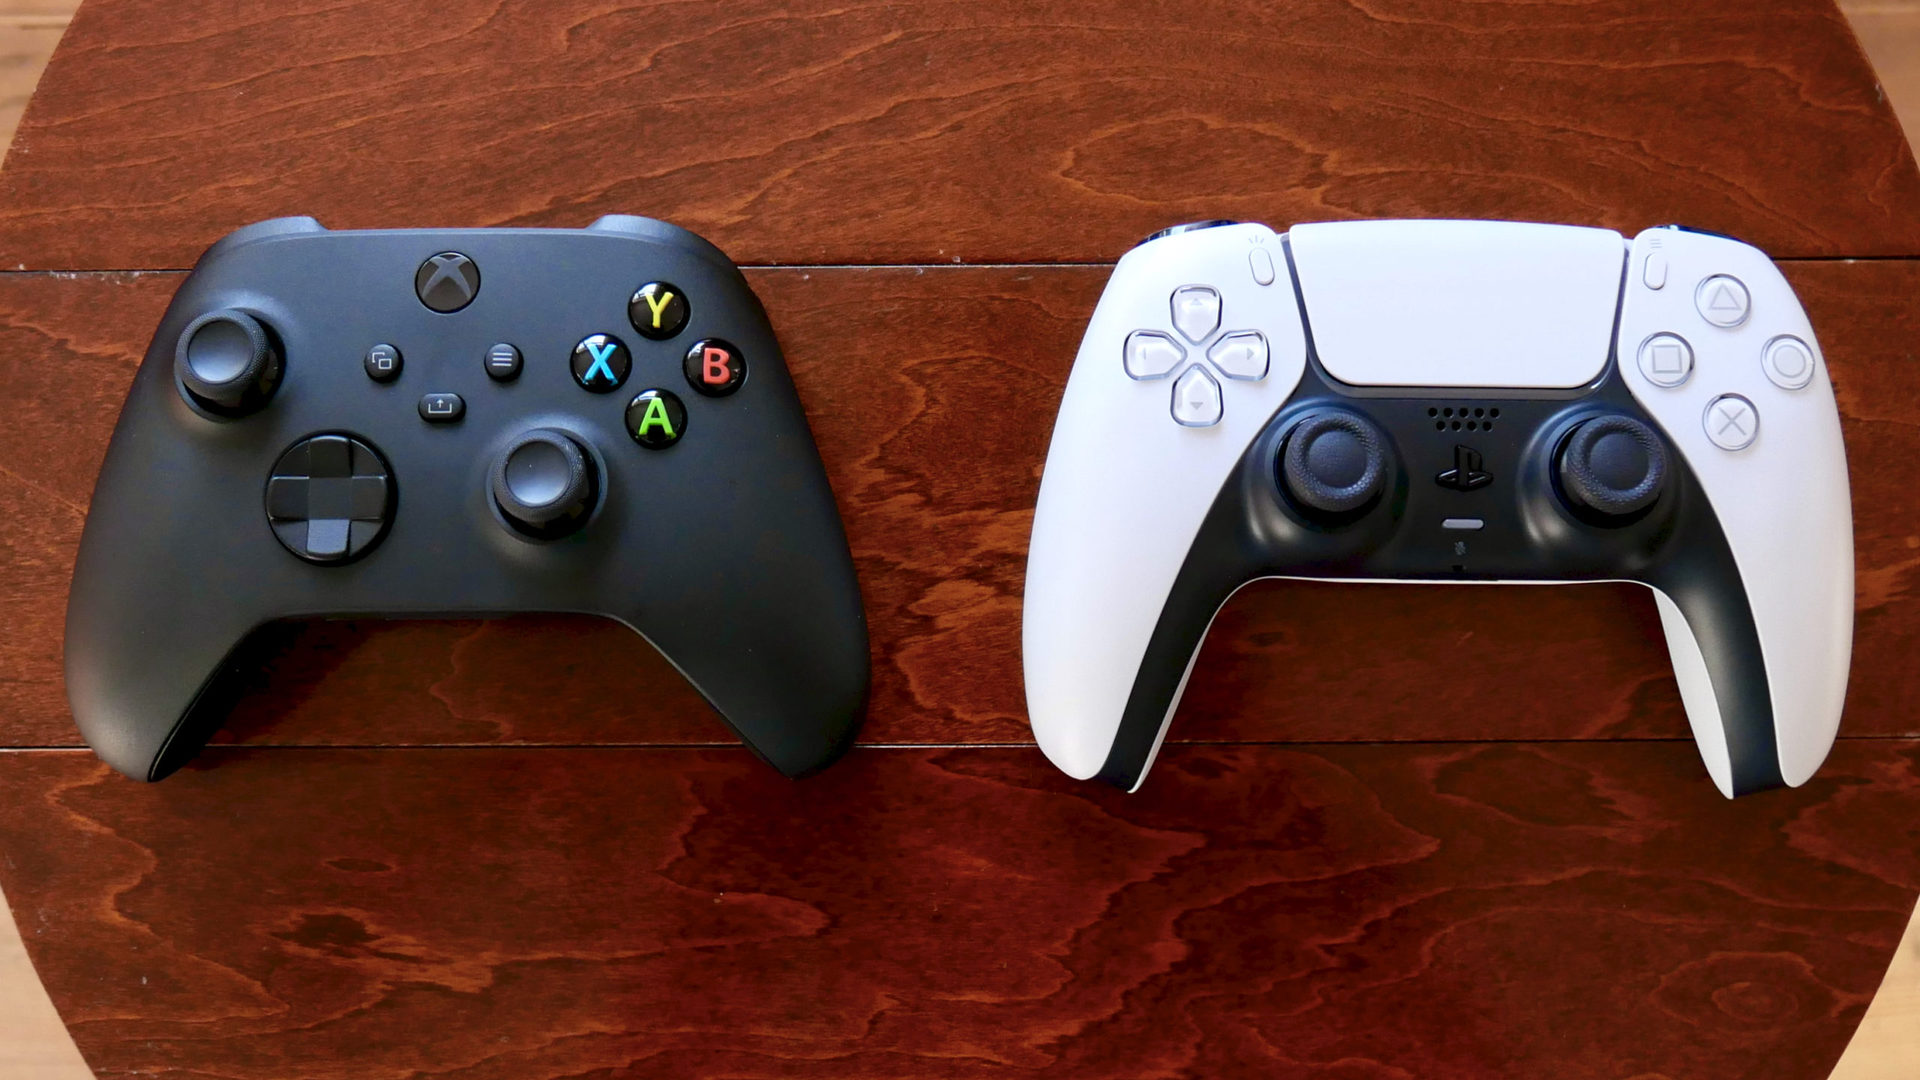 ontwikkeling staan Afvoer Daily Authority: 🎮 Smart TVs are Xbox consoles now - Android Authority